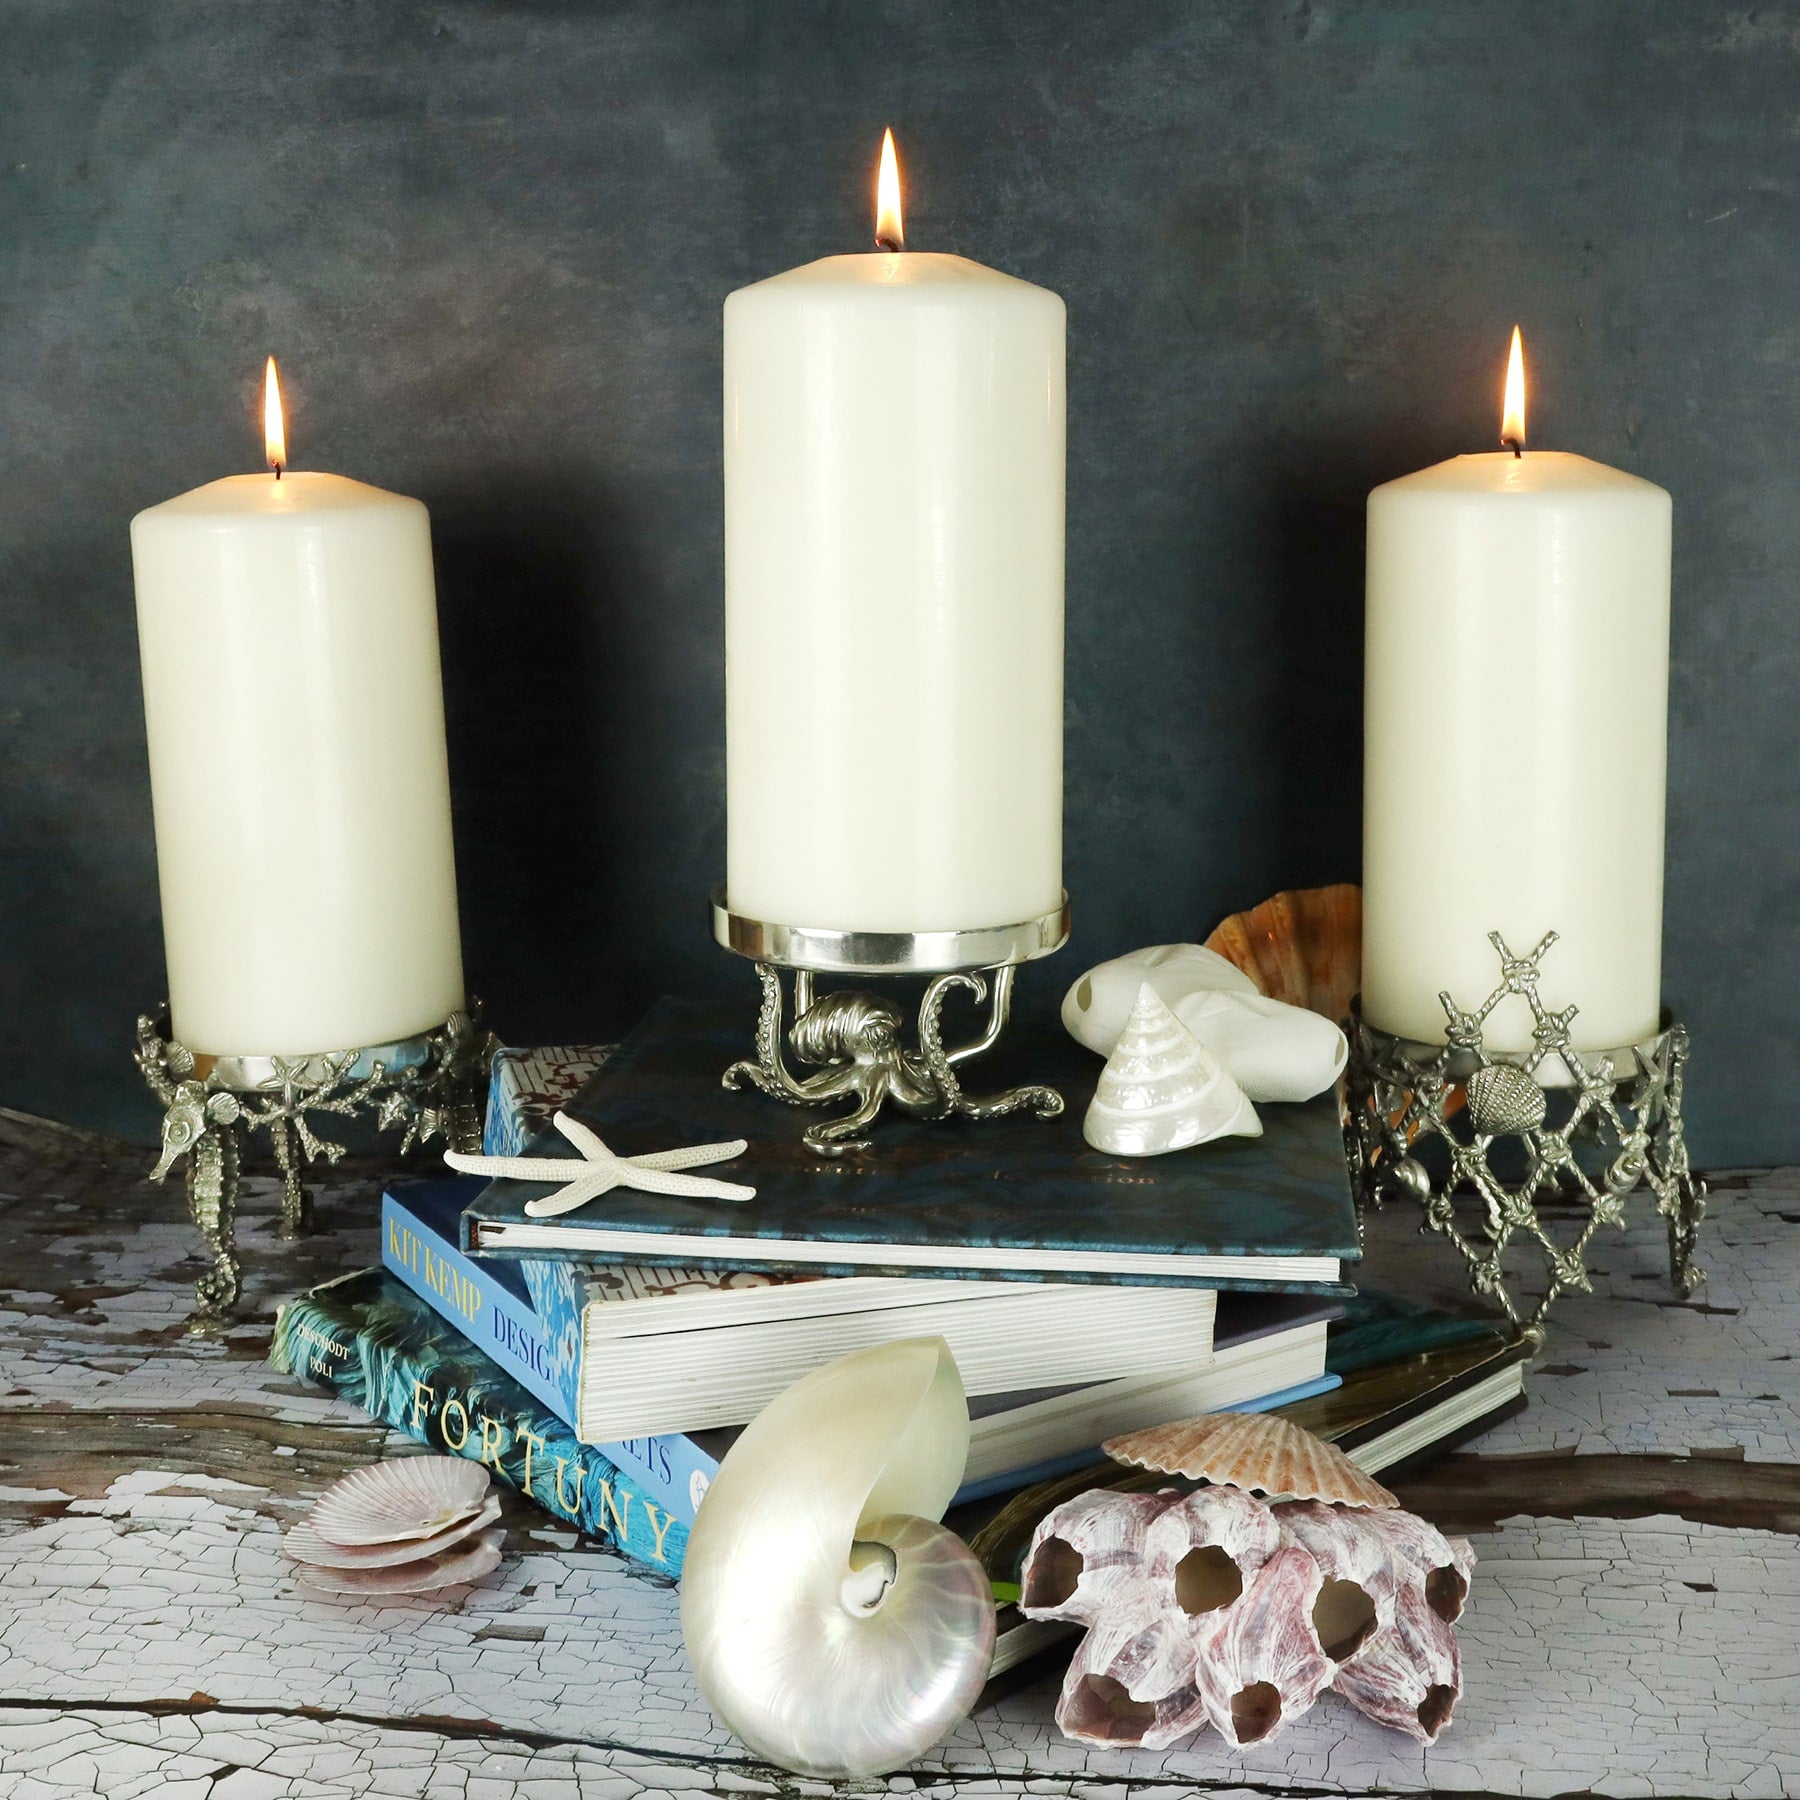 Close up shot of three large Pewter Candle Holder featuring intricate seahorses as the base placed on a table with books and shells on the table